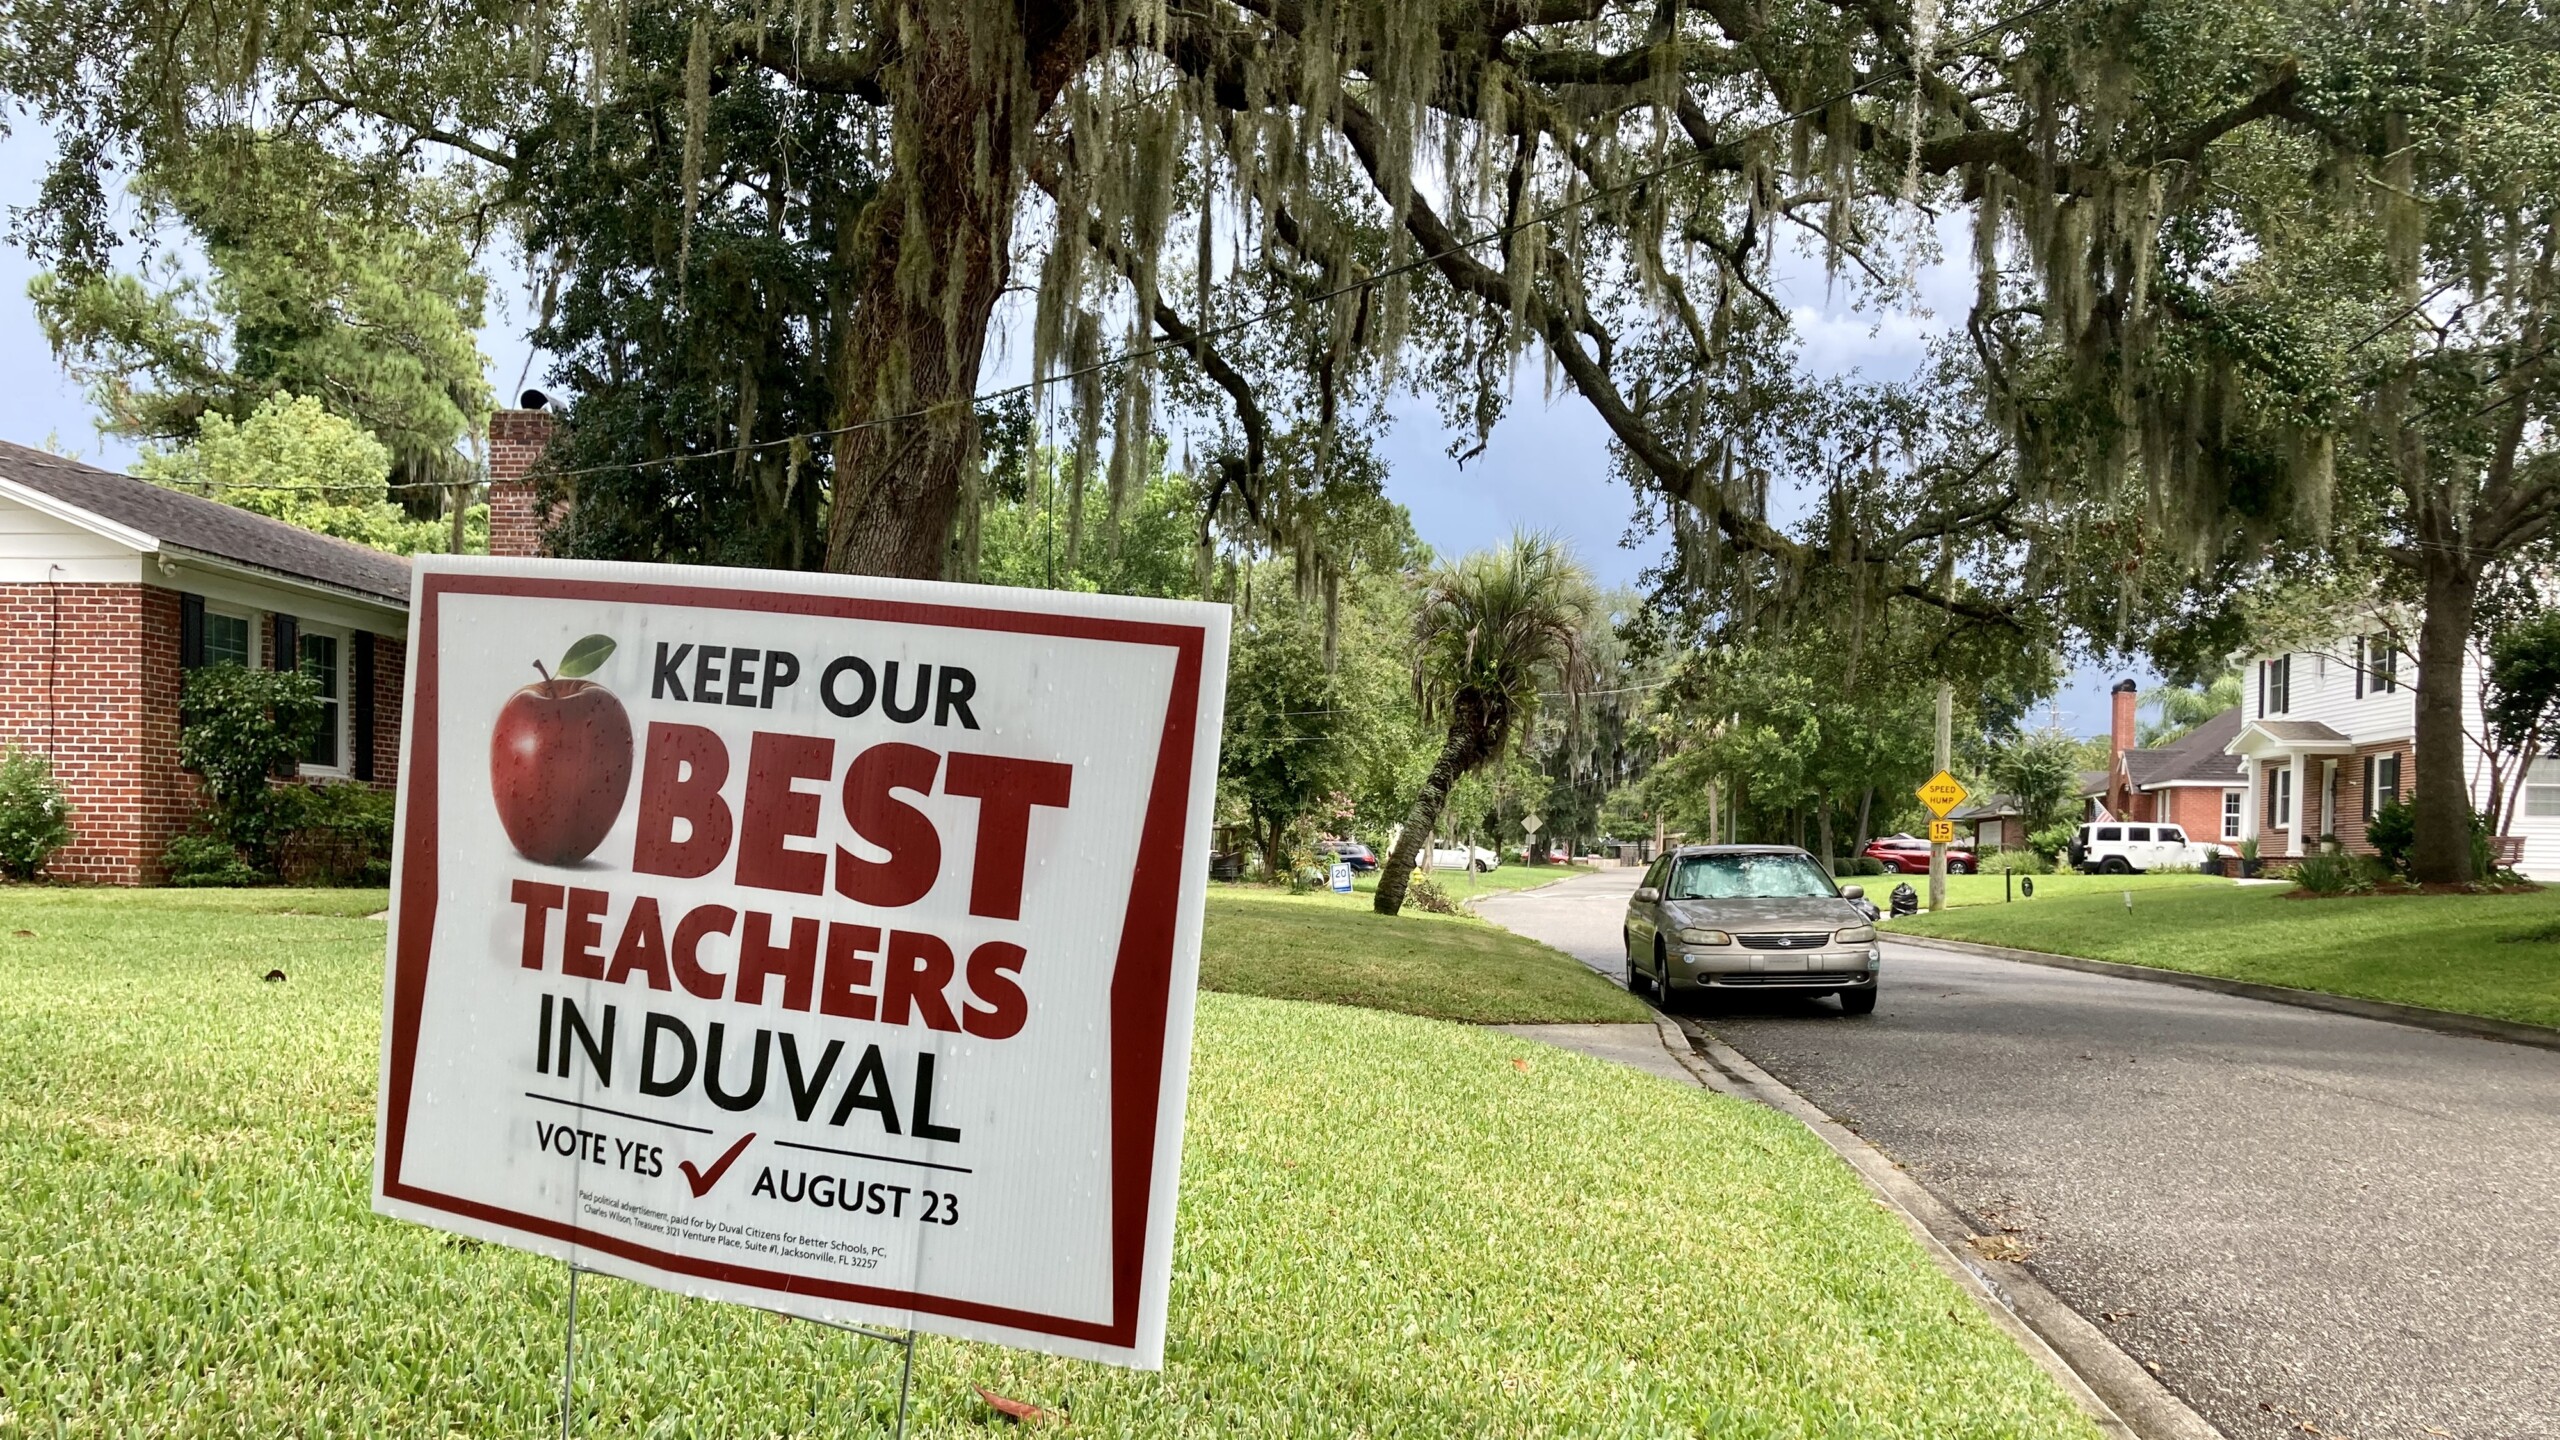 A yard sign that reads "Keep Our Best Teachers in Duval" outside a brick home.